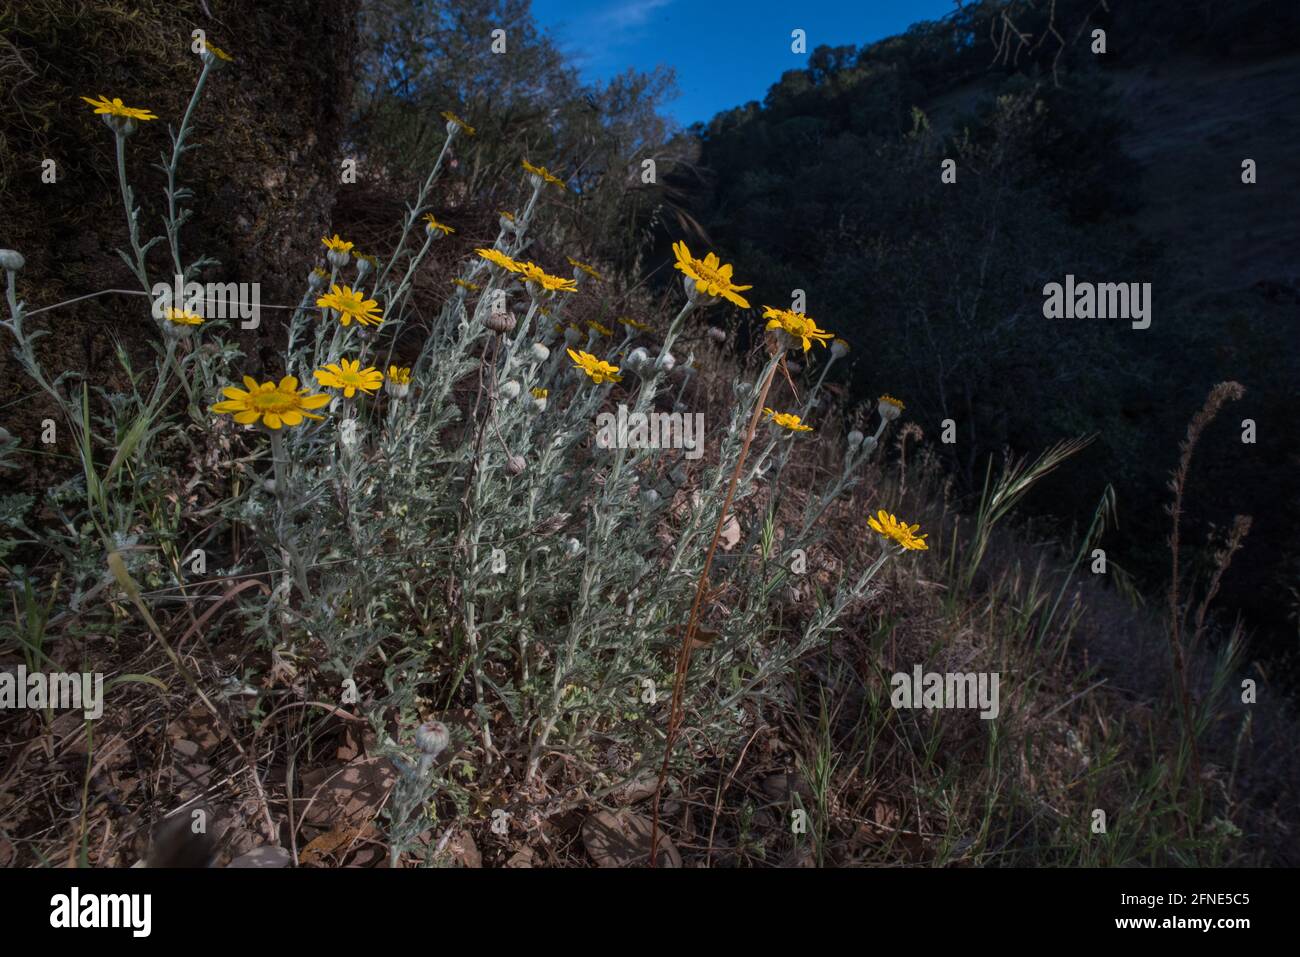 Common Wooly Sunflower (Eriophyllum lanatum) blooming in the San Francisco bay area of California, USA. Stock Photo